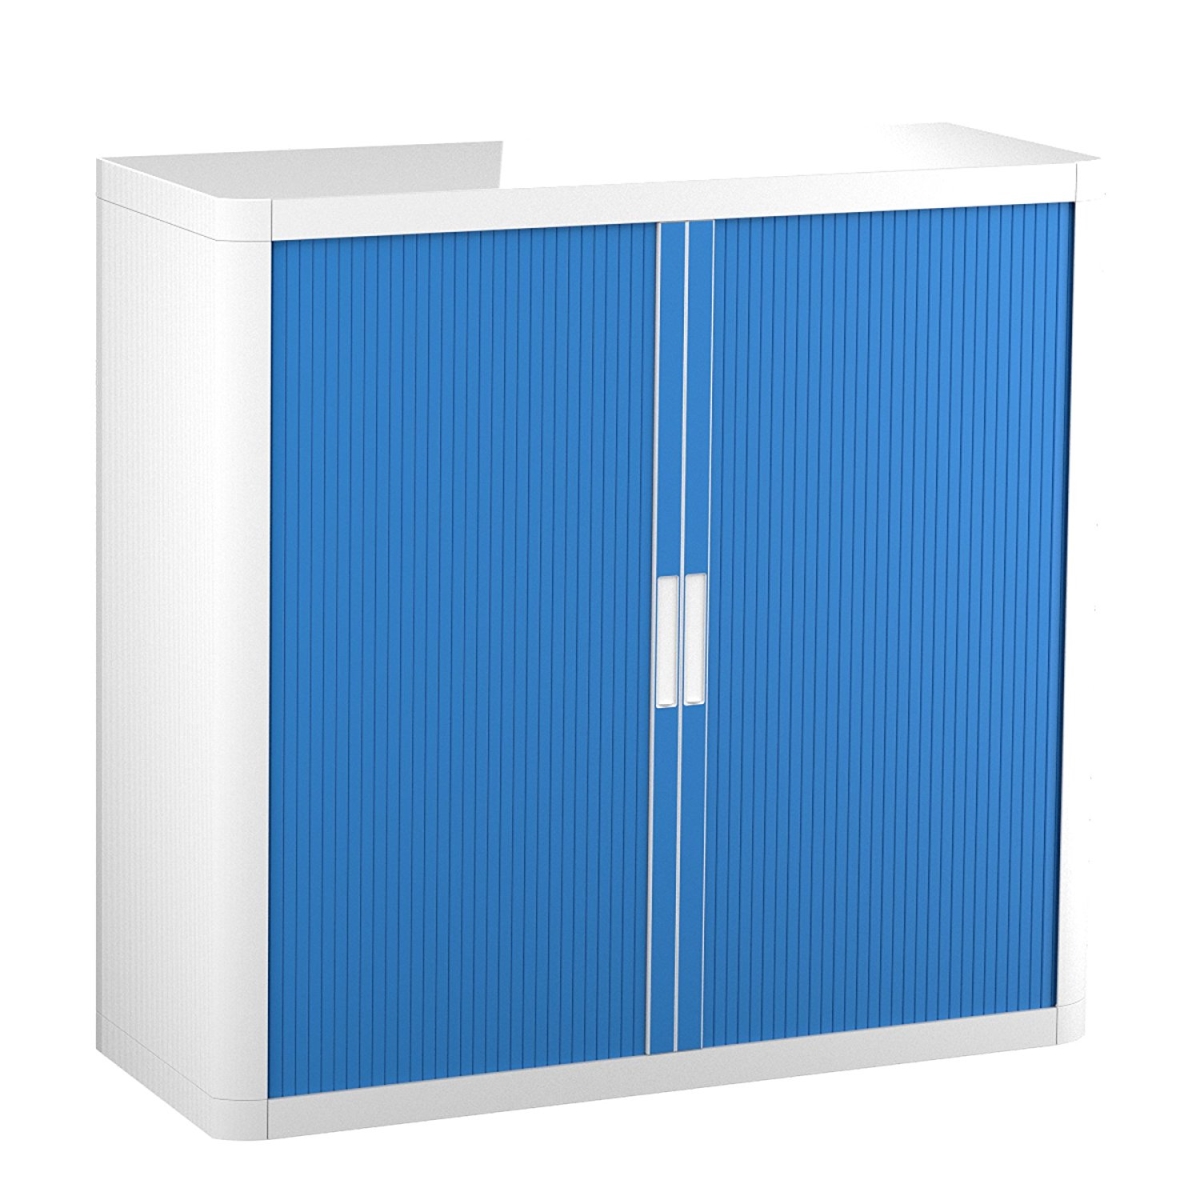 37464 41 In. Easyoffice Storage Cabinet, White & Blue